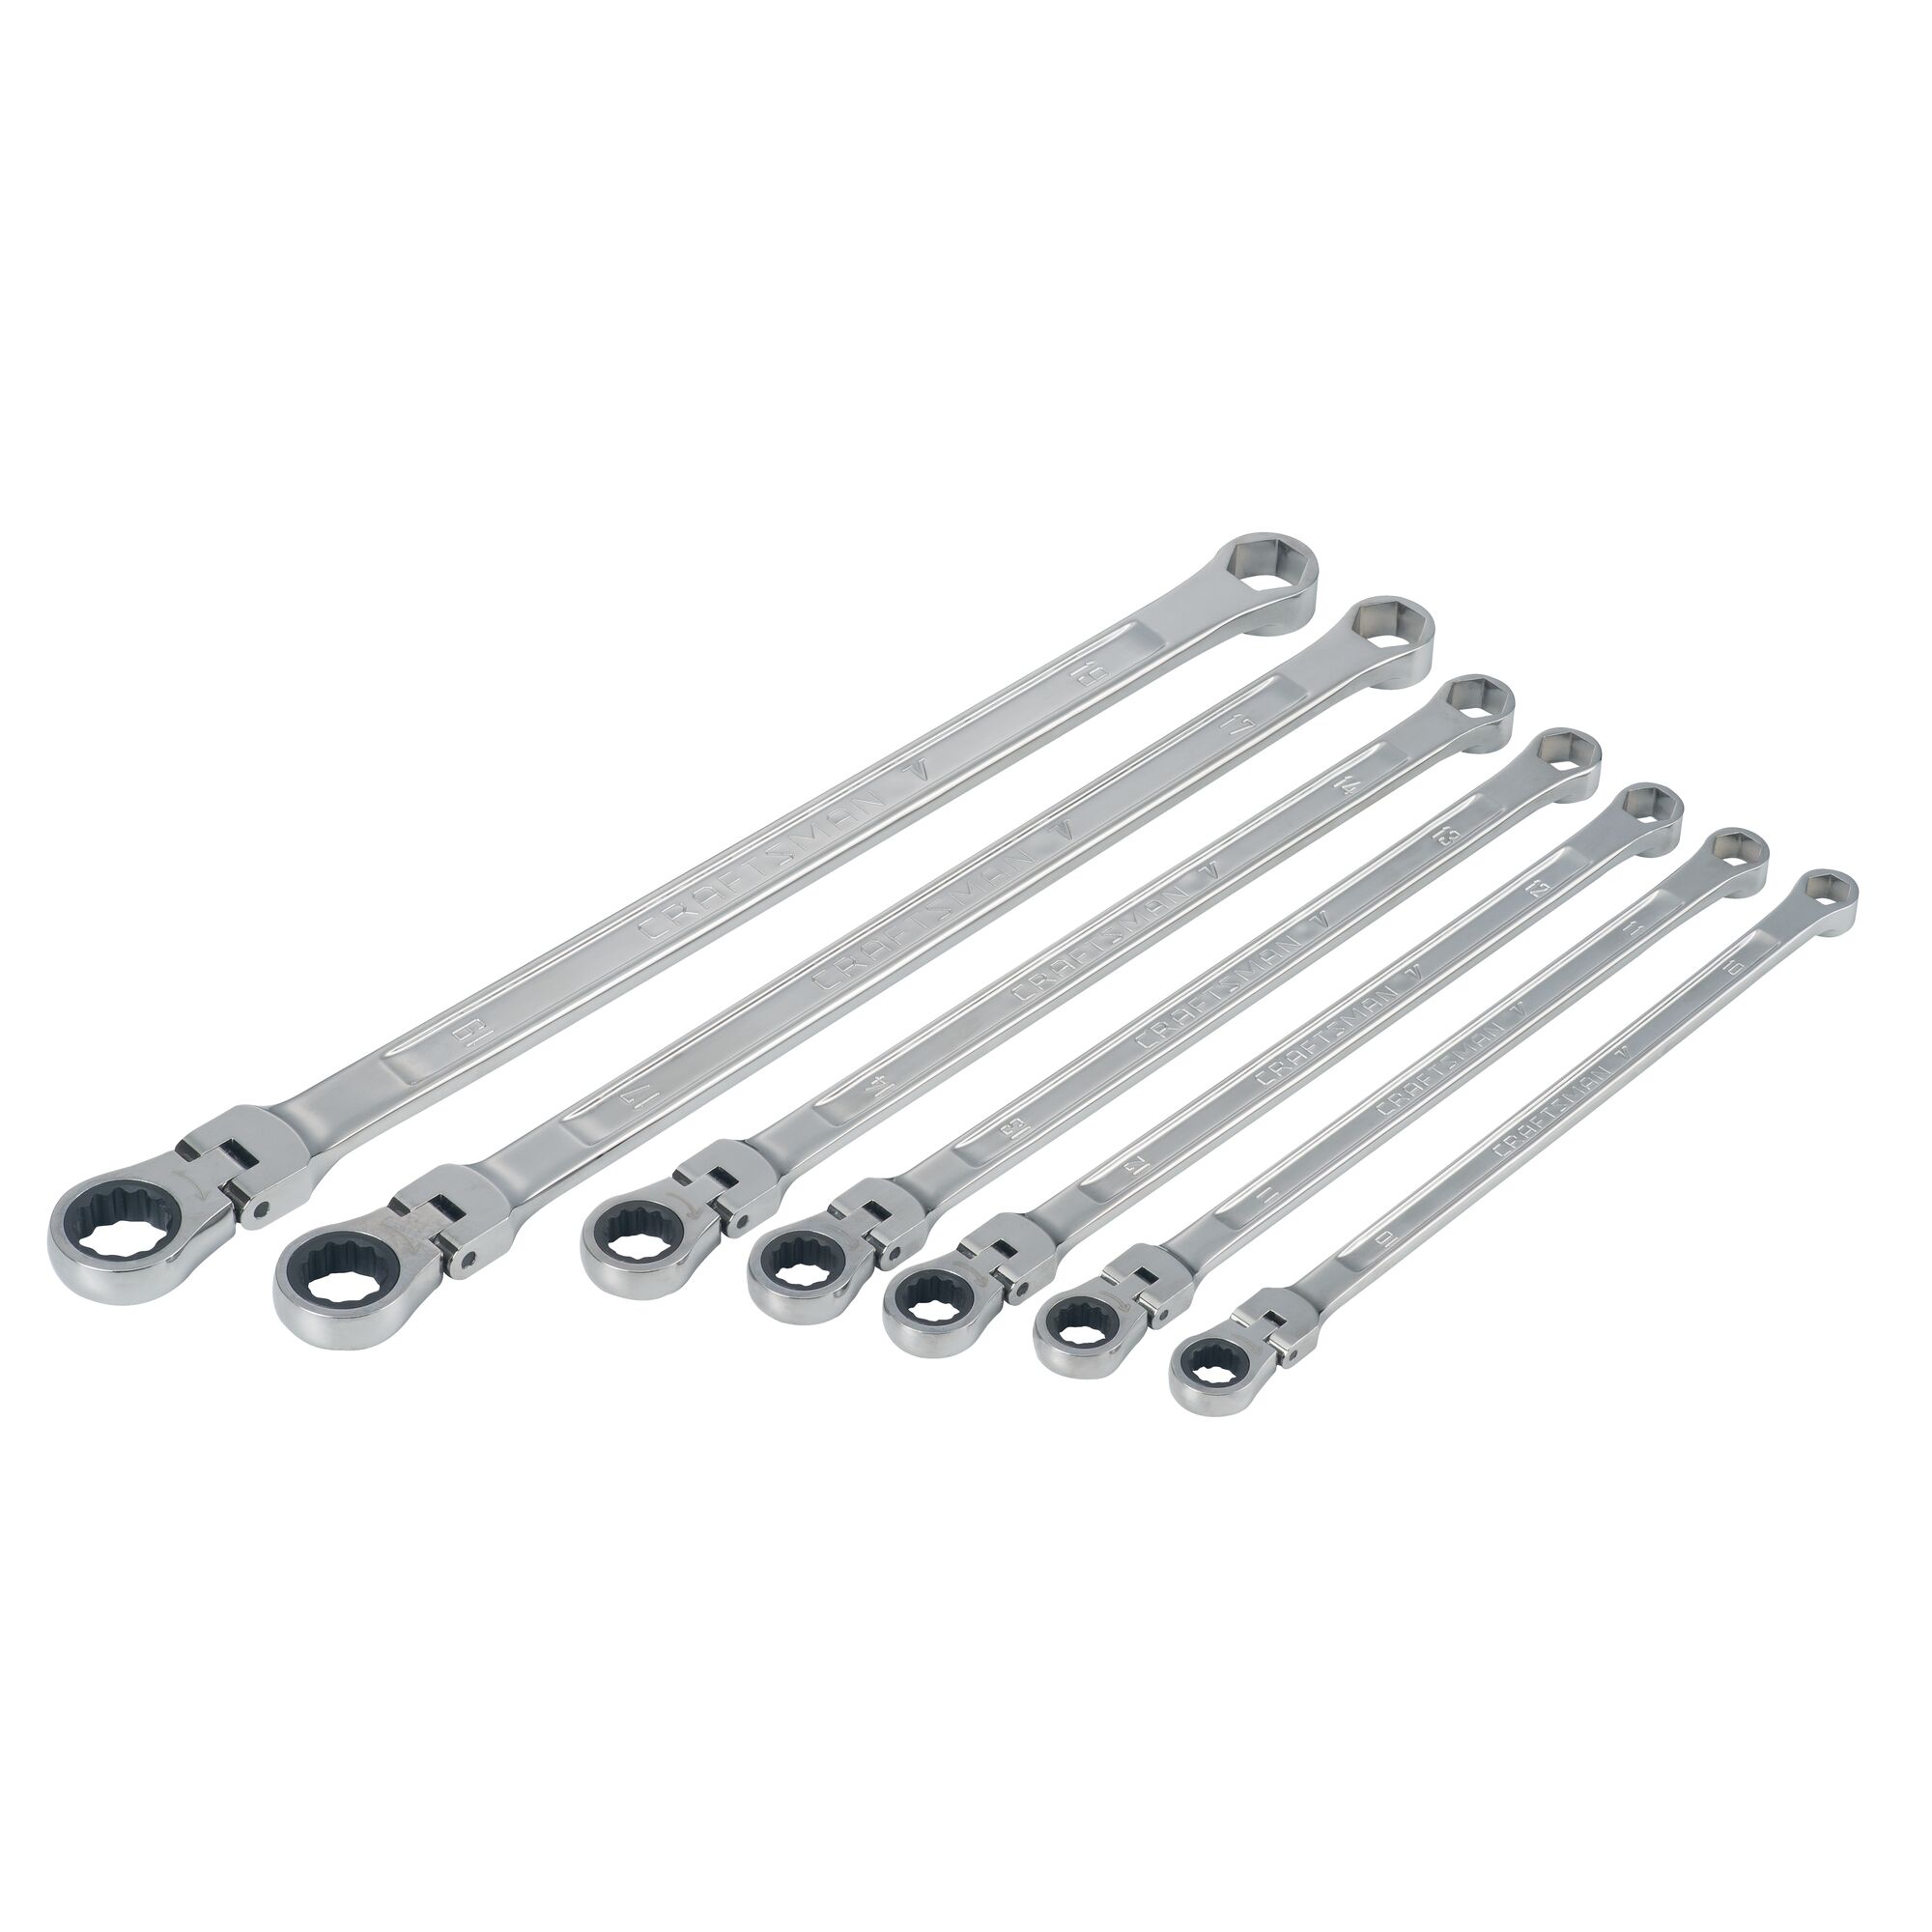 Right profile of V series XXL metric ratcheting single flex head double box end wrench set (7 piece).